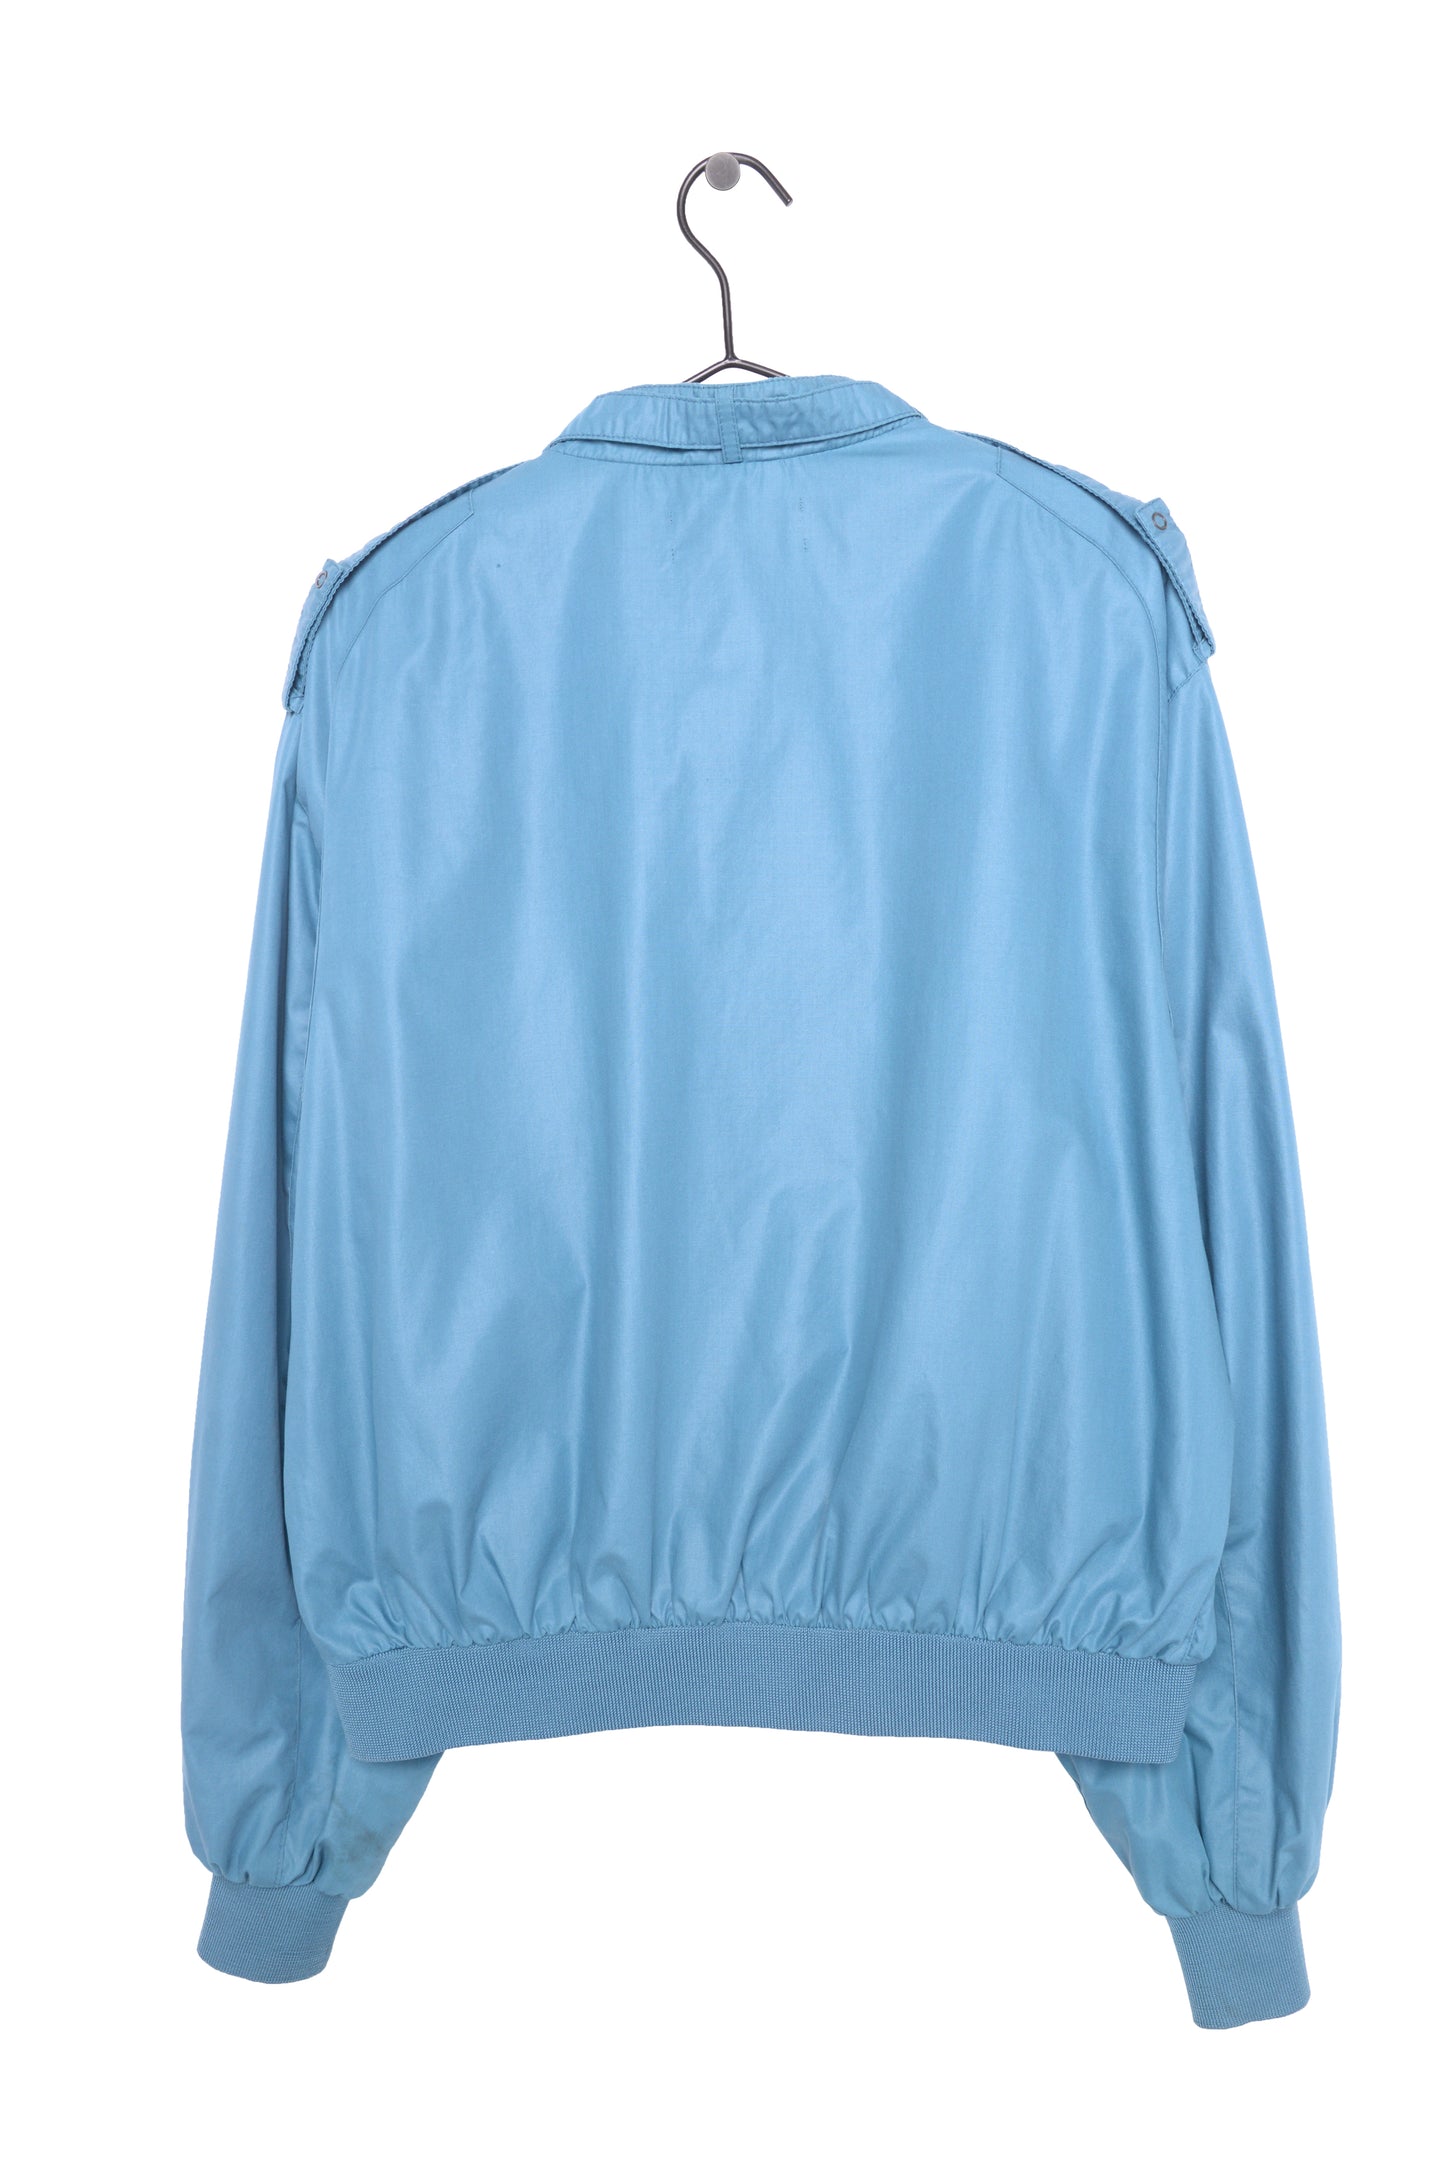 Baby Blue Member's Only Jacket